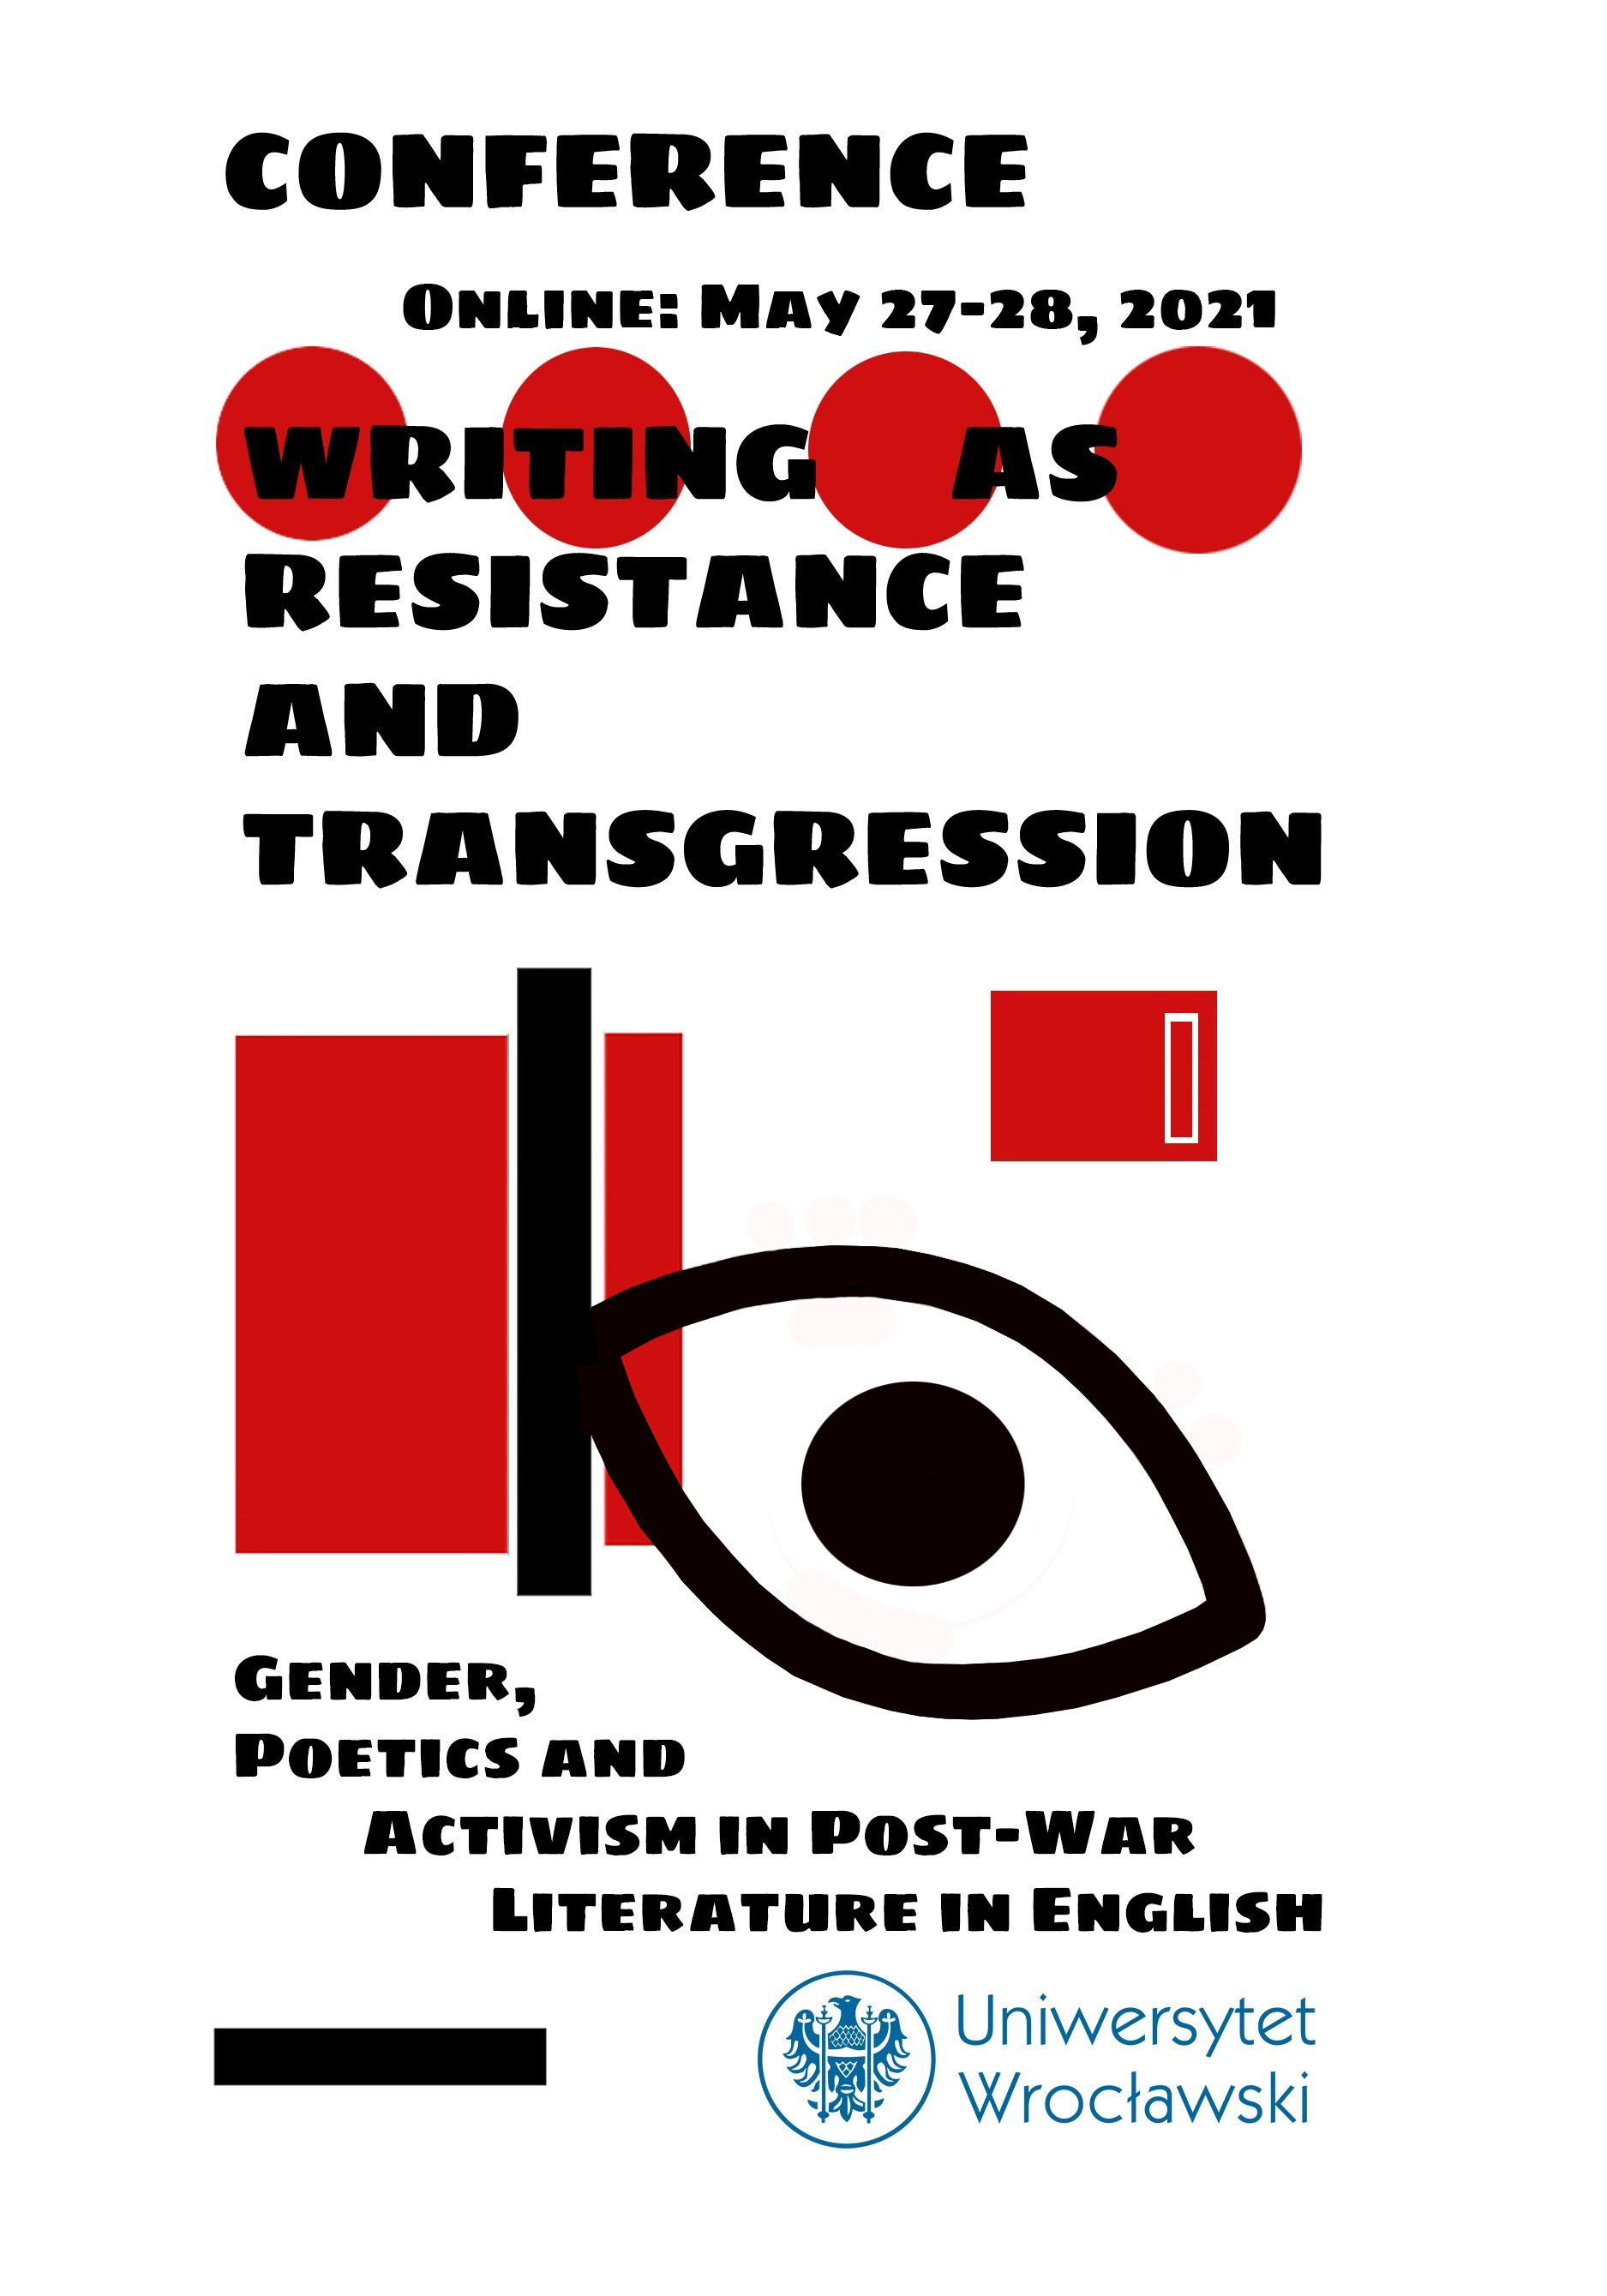 Attachment post-531211-Poster_WritingAsResistance_UWr_IFA_Conference.jpg